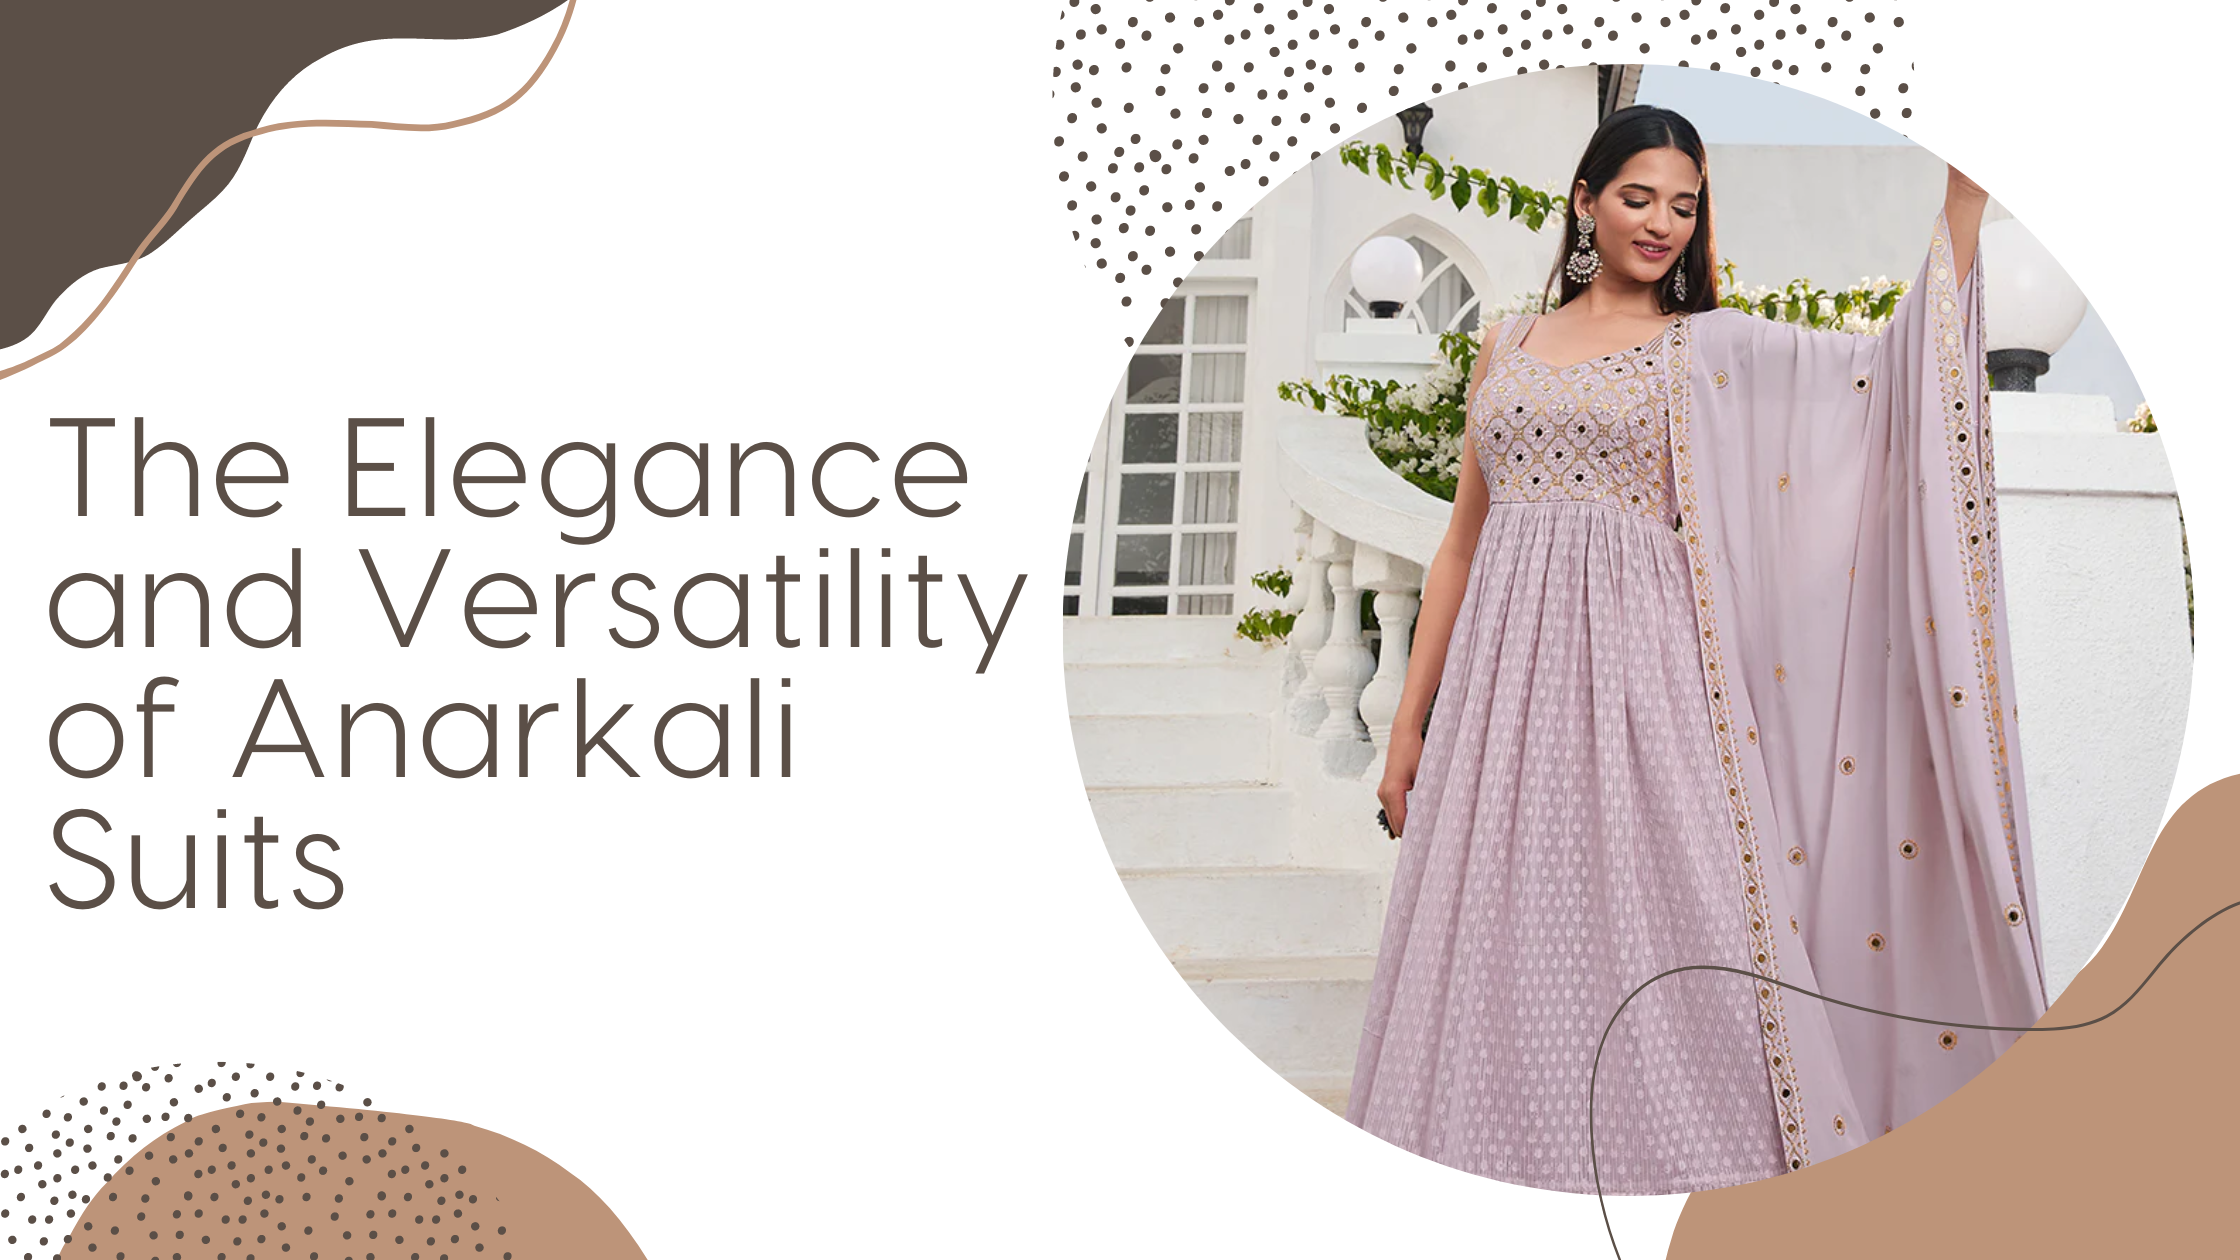 The Elegance and Versatility of Anarkali Suits: A Perfect Attire Choice for Weddings